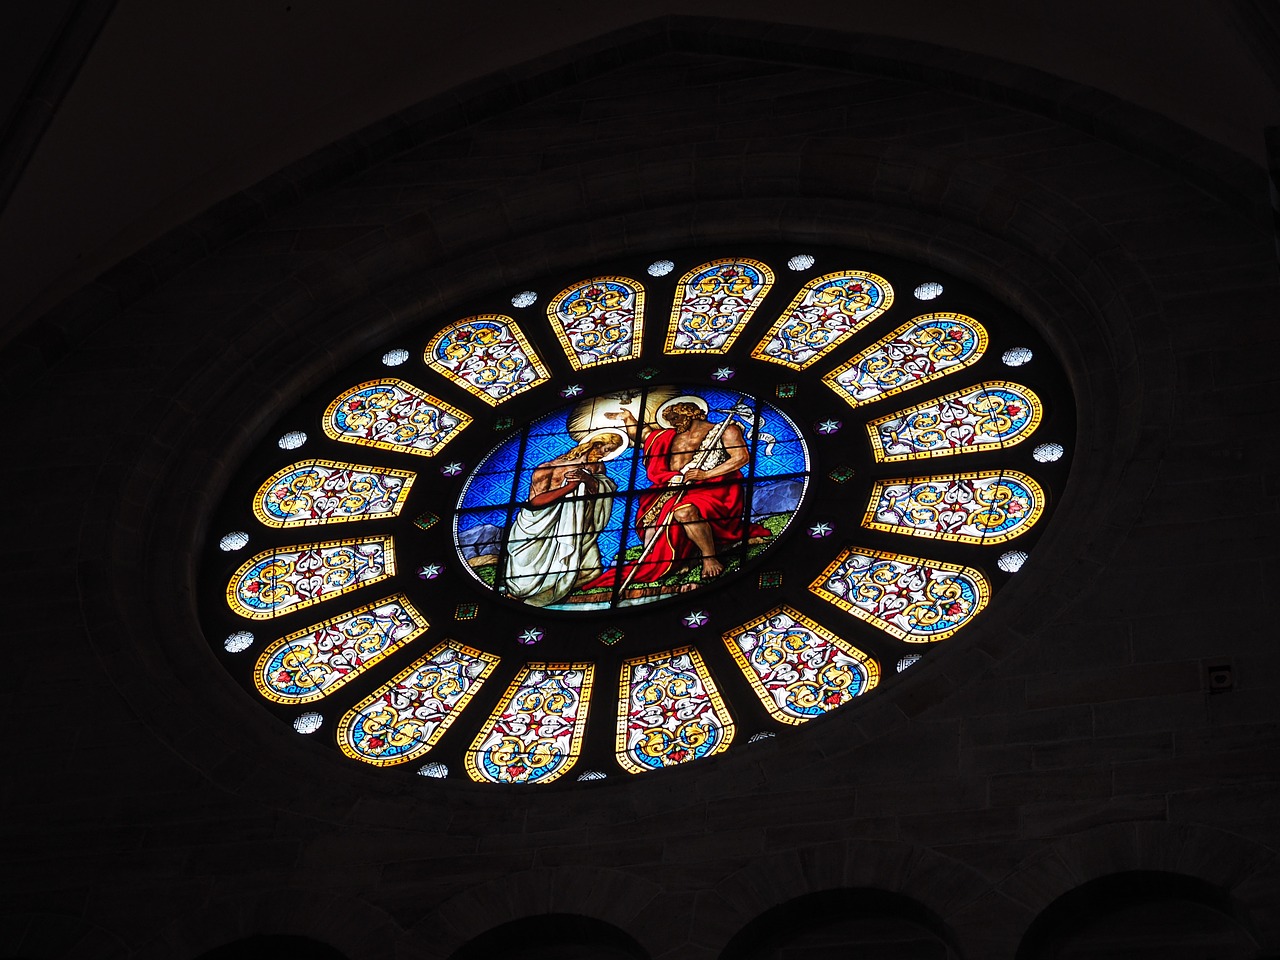 rose window window stained glass free photo